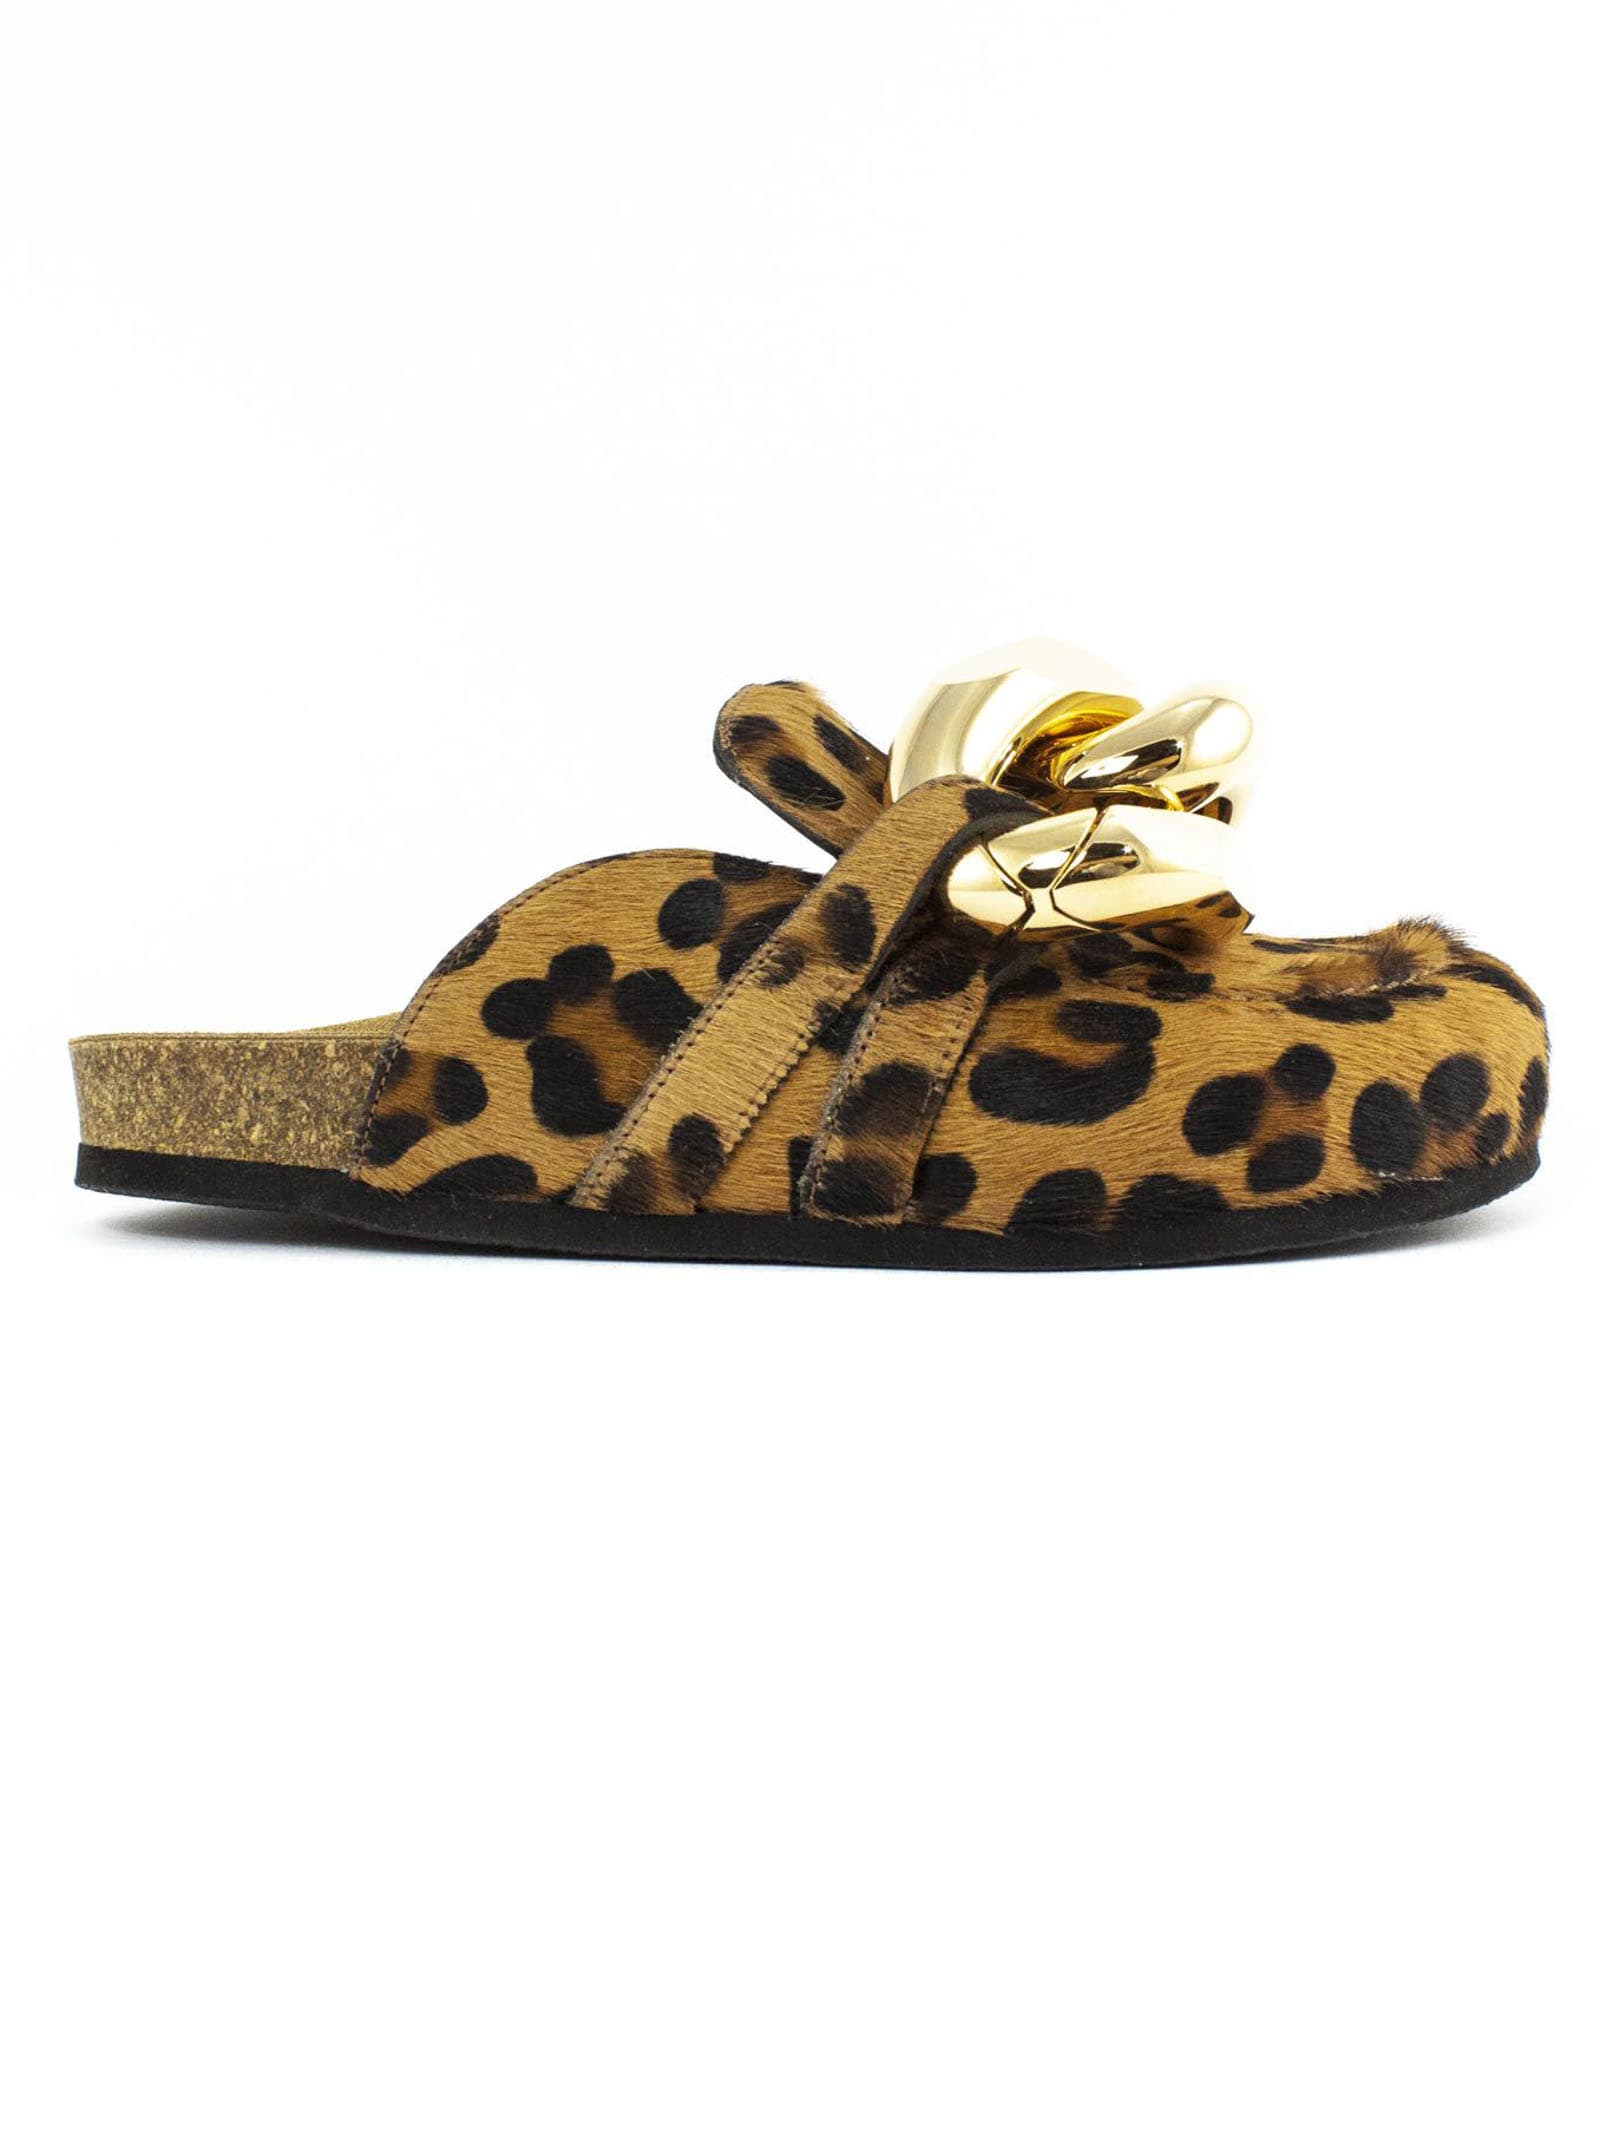 J.W. Anderson Leopard Pony Mules